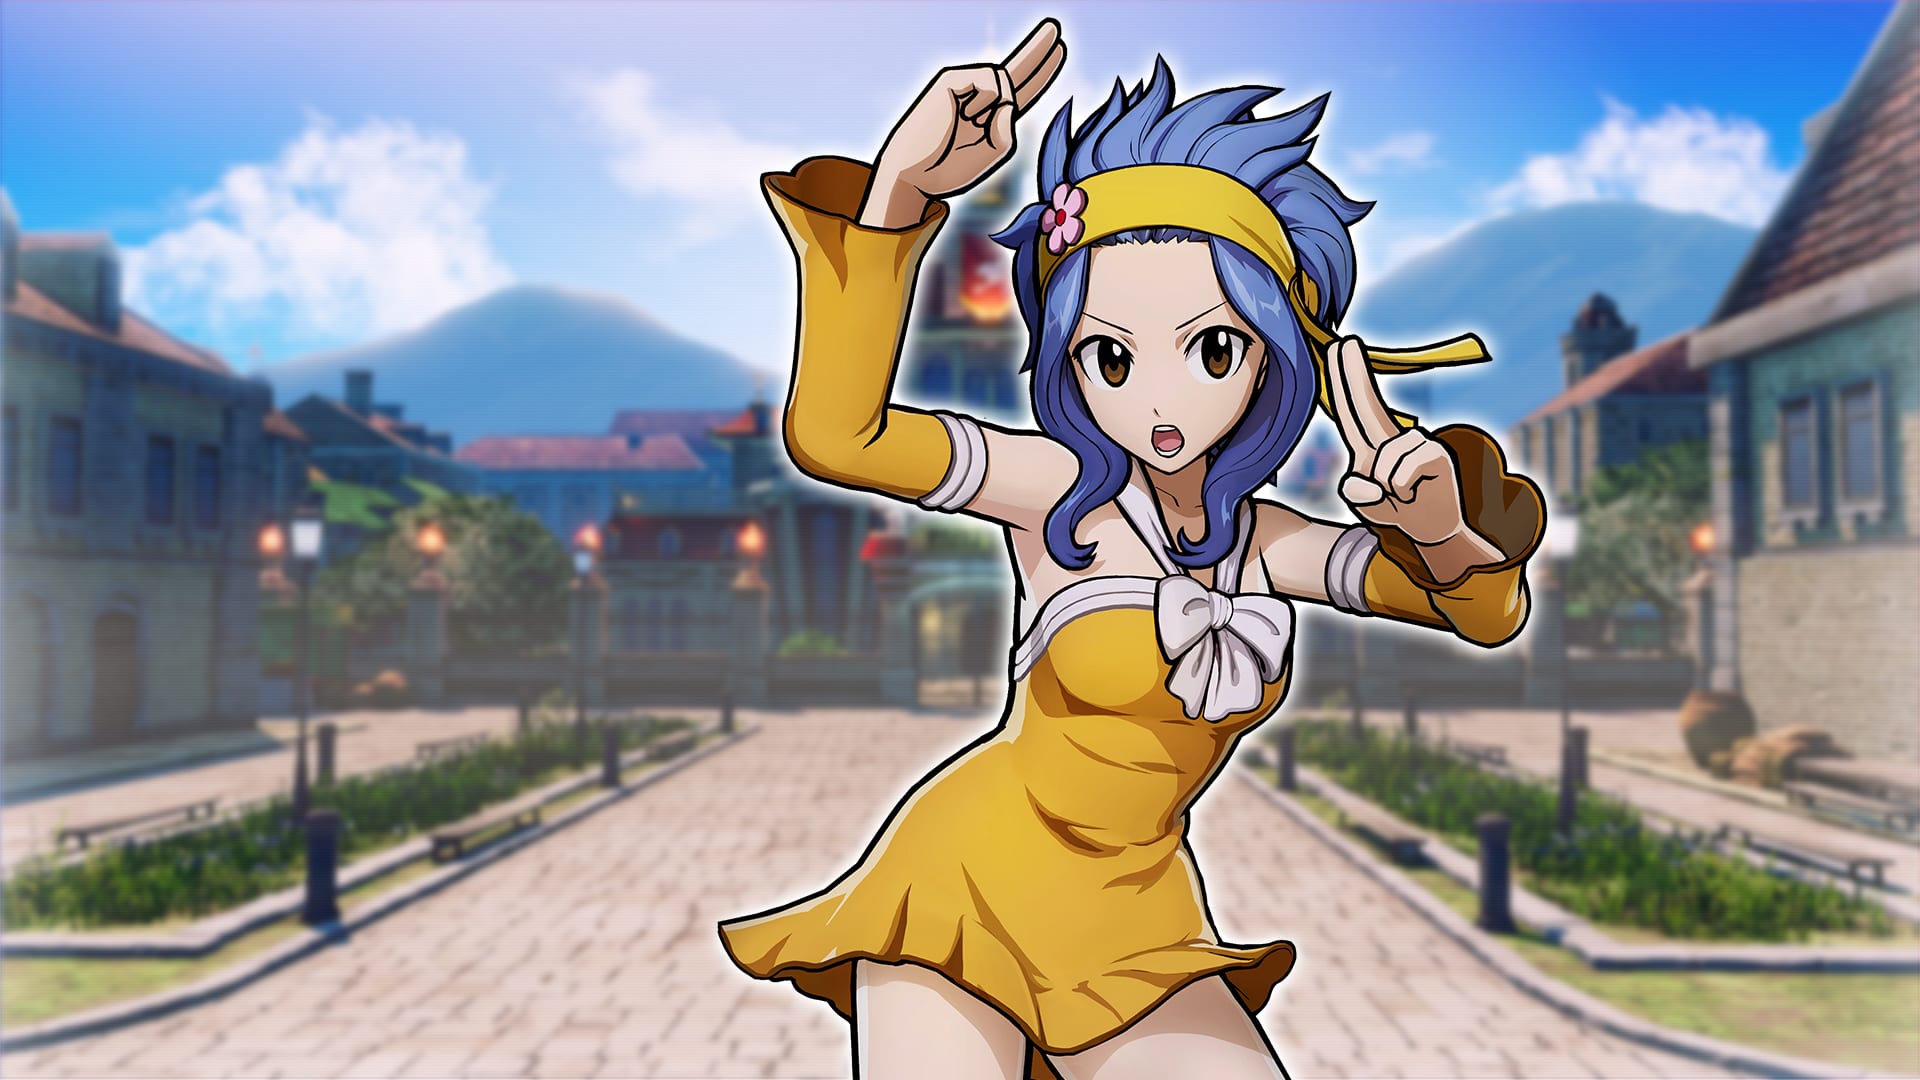 Additional Friends Set "Levy"